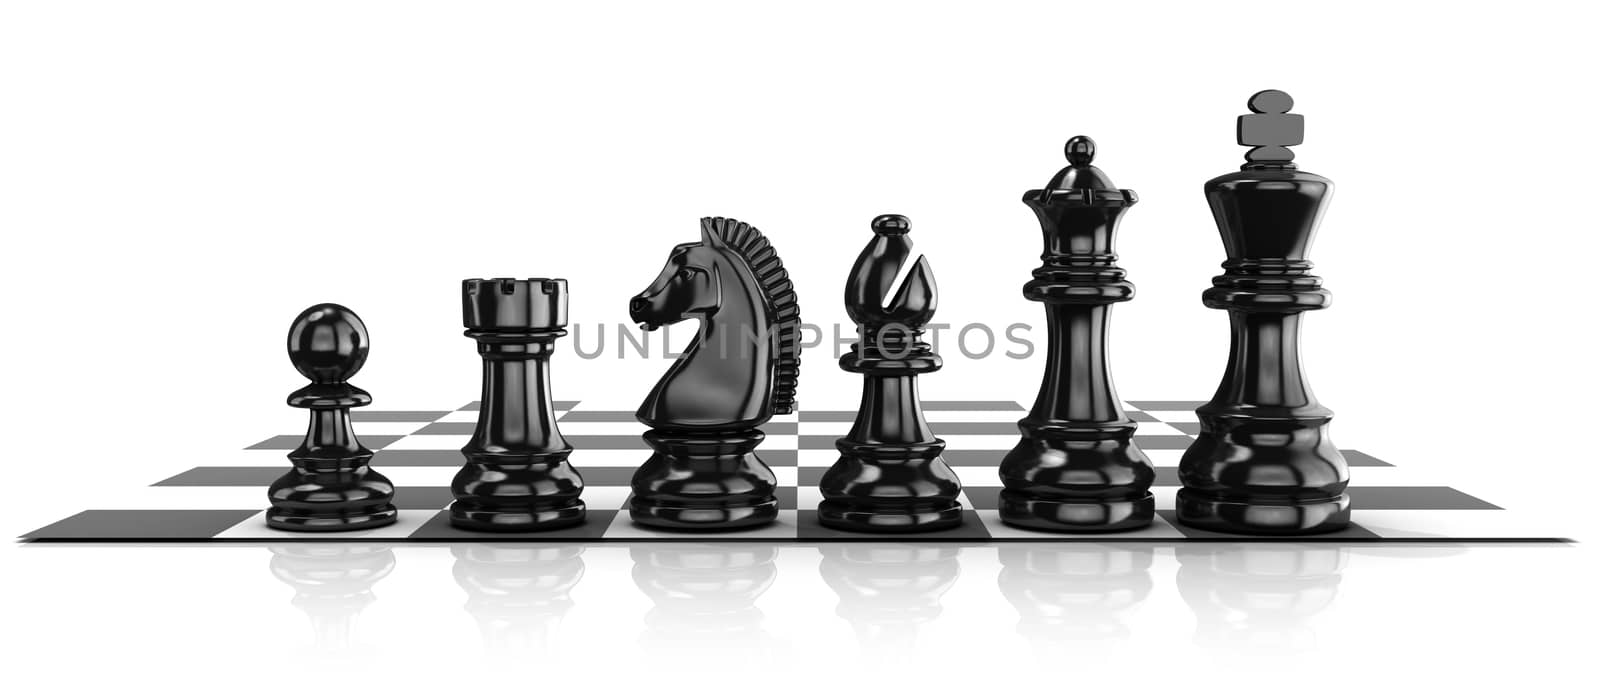 Chess black pieces, standing on board. Isolated on white background